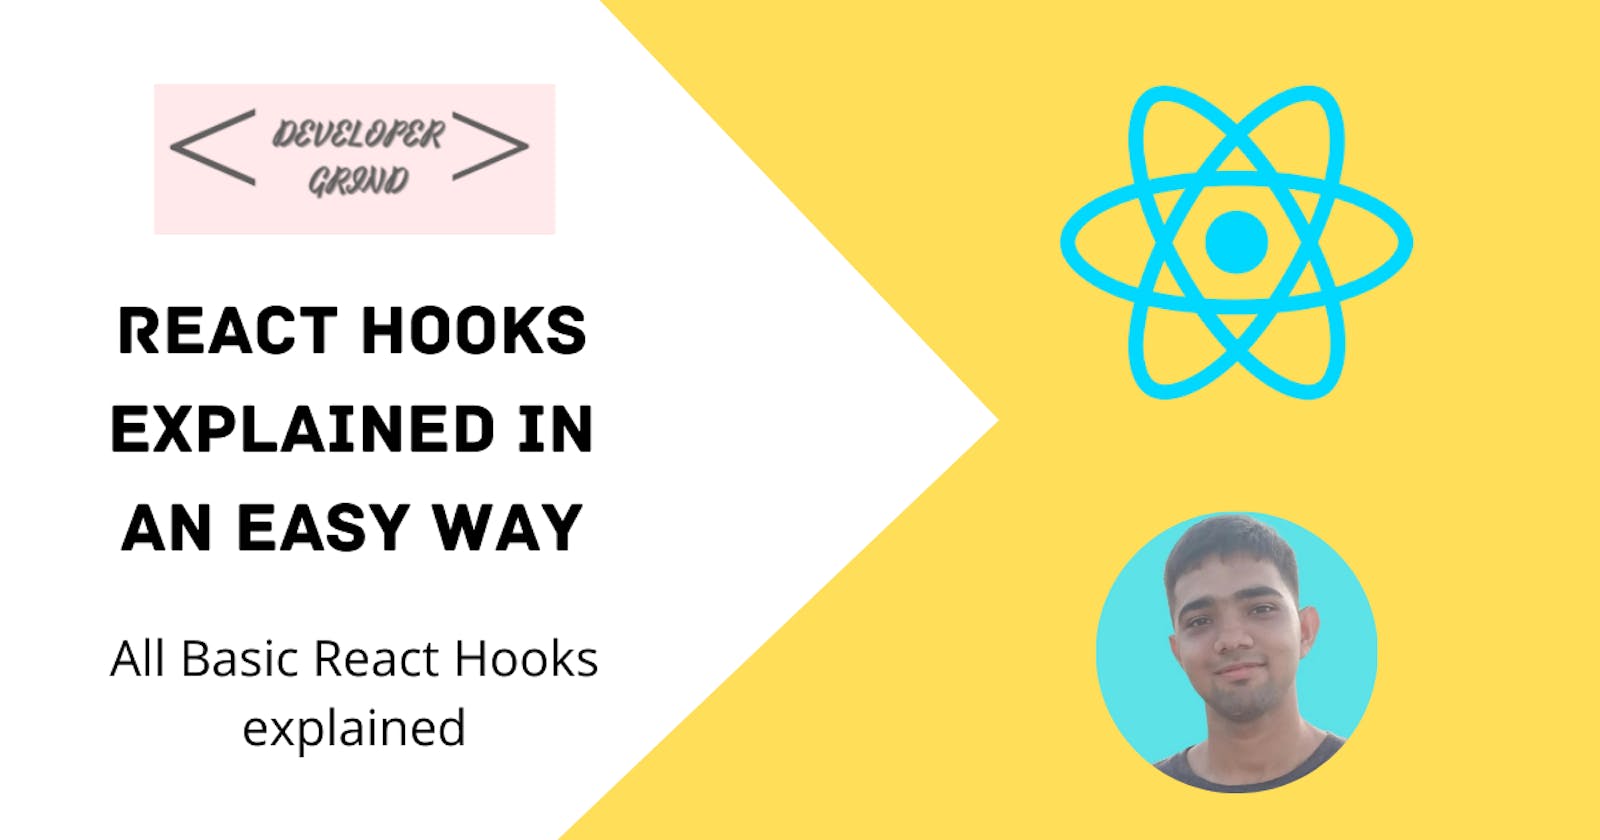 All Basic React Hooks explained along with examples